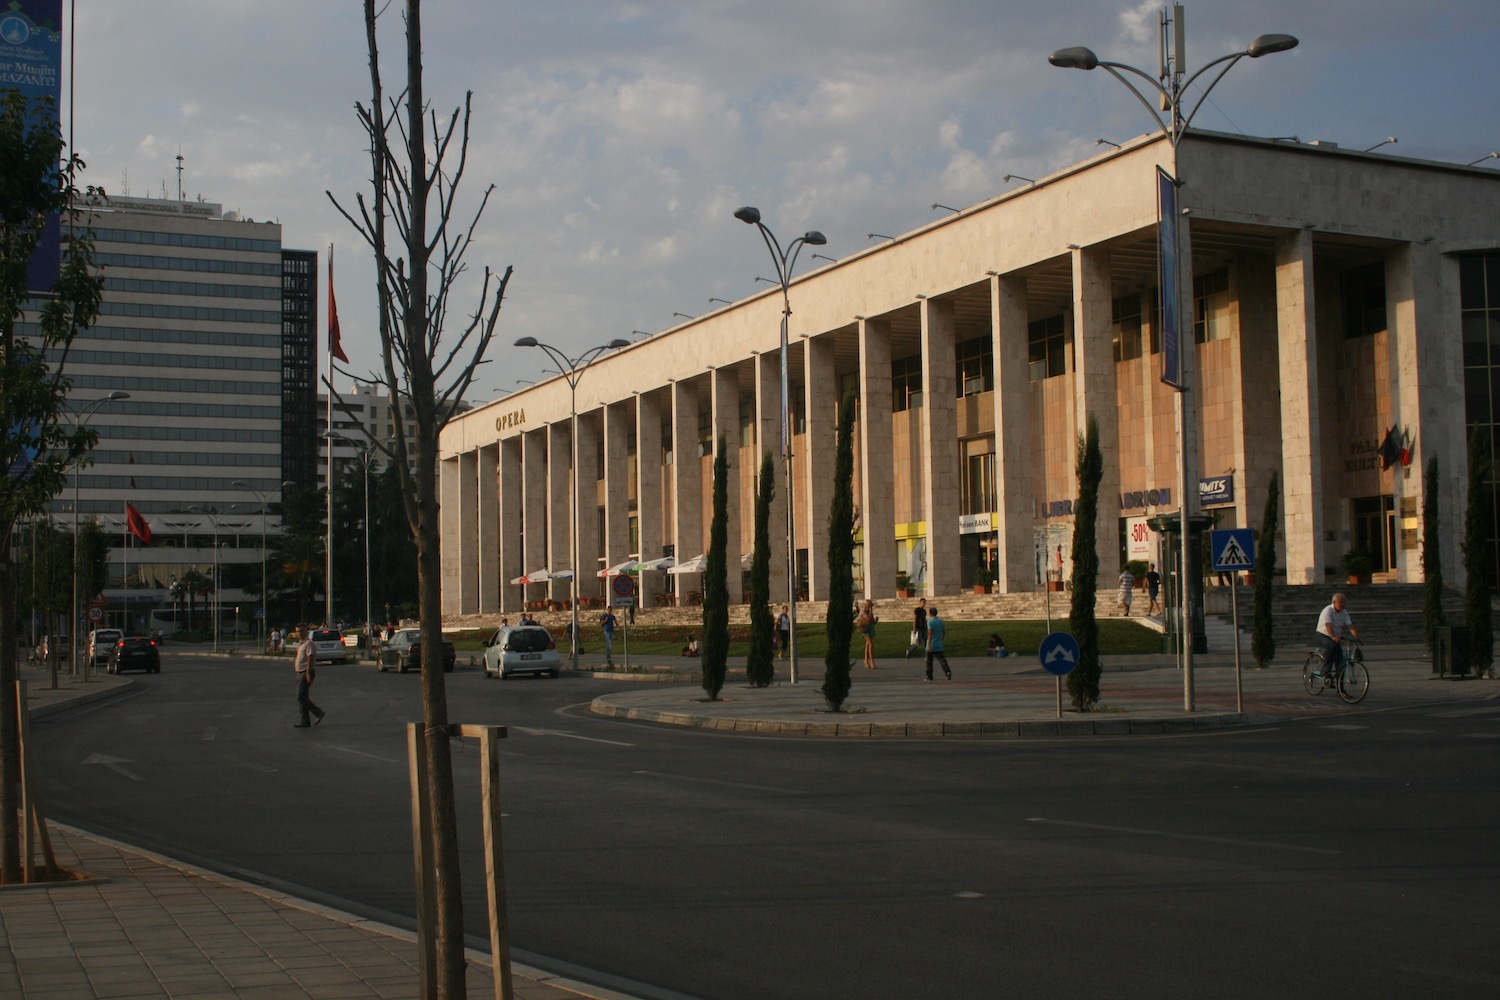 a building with columns and people walking on the street